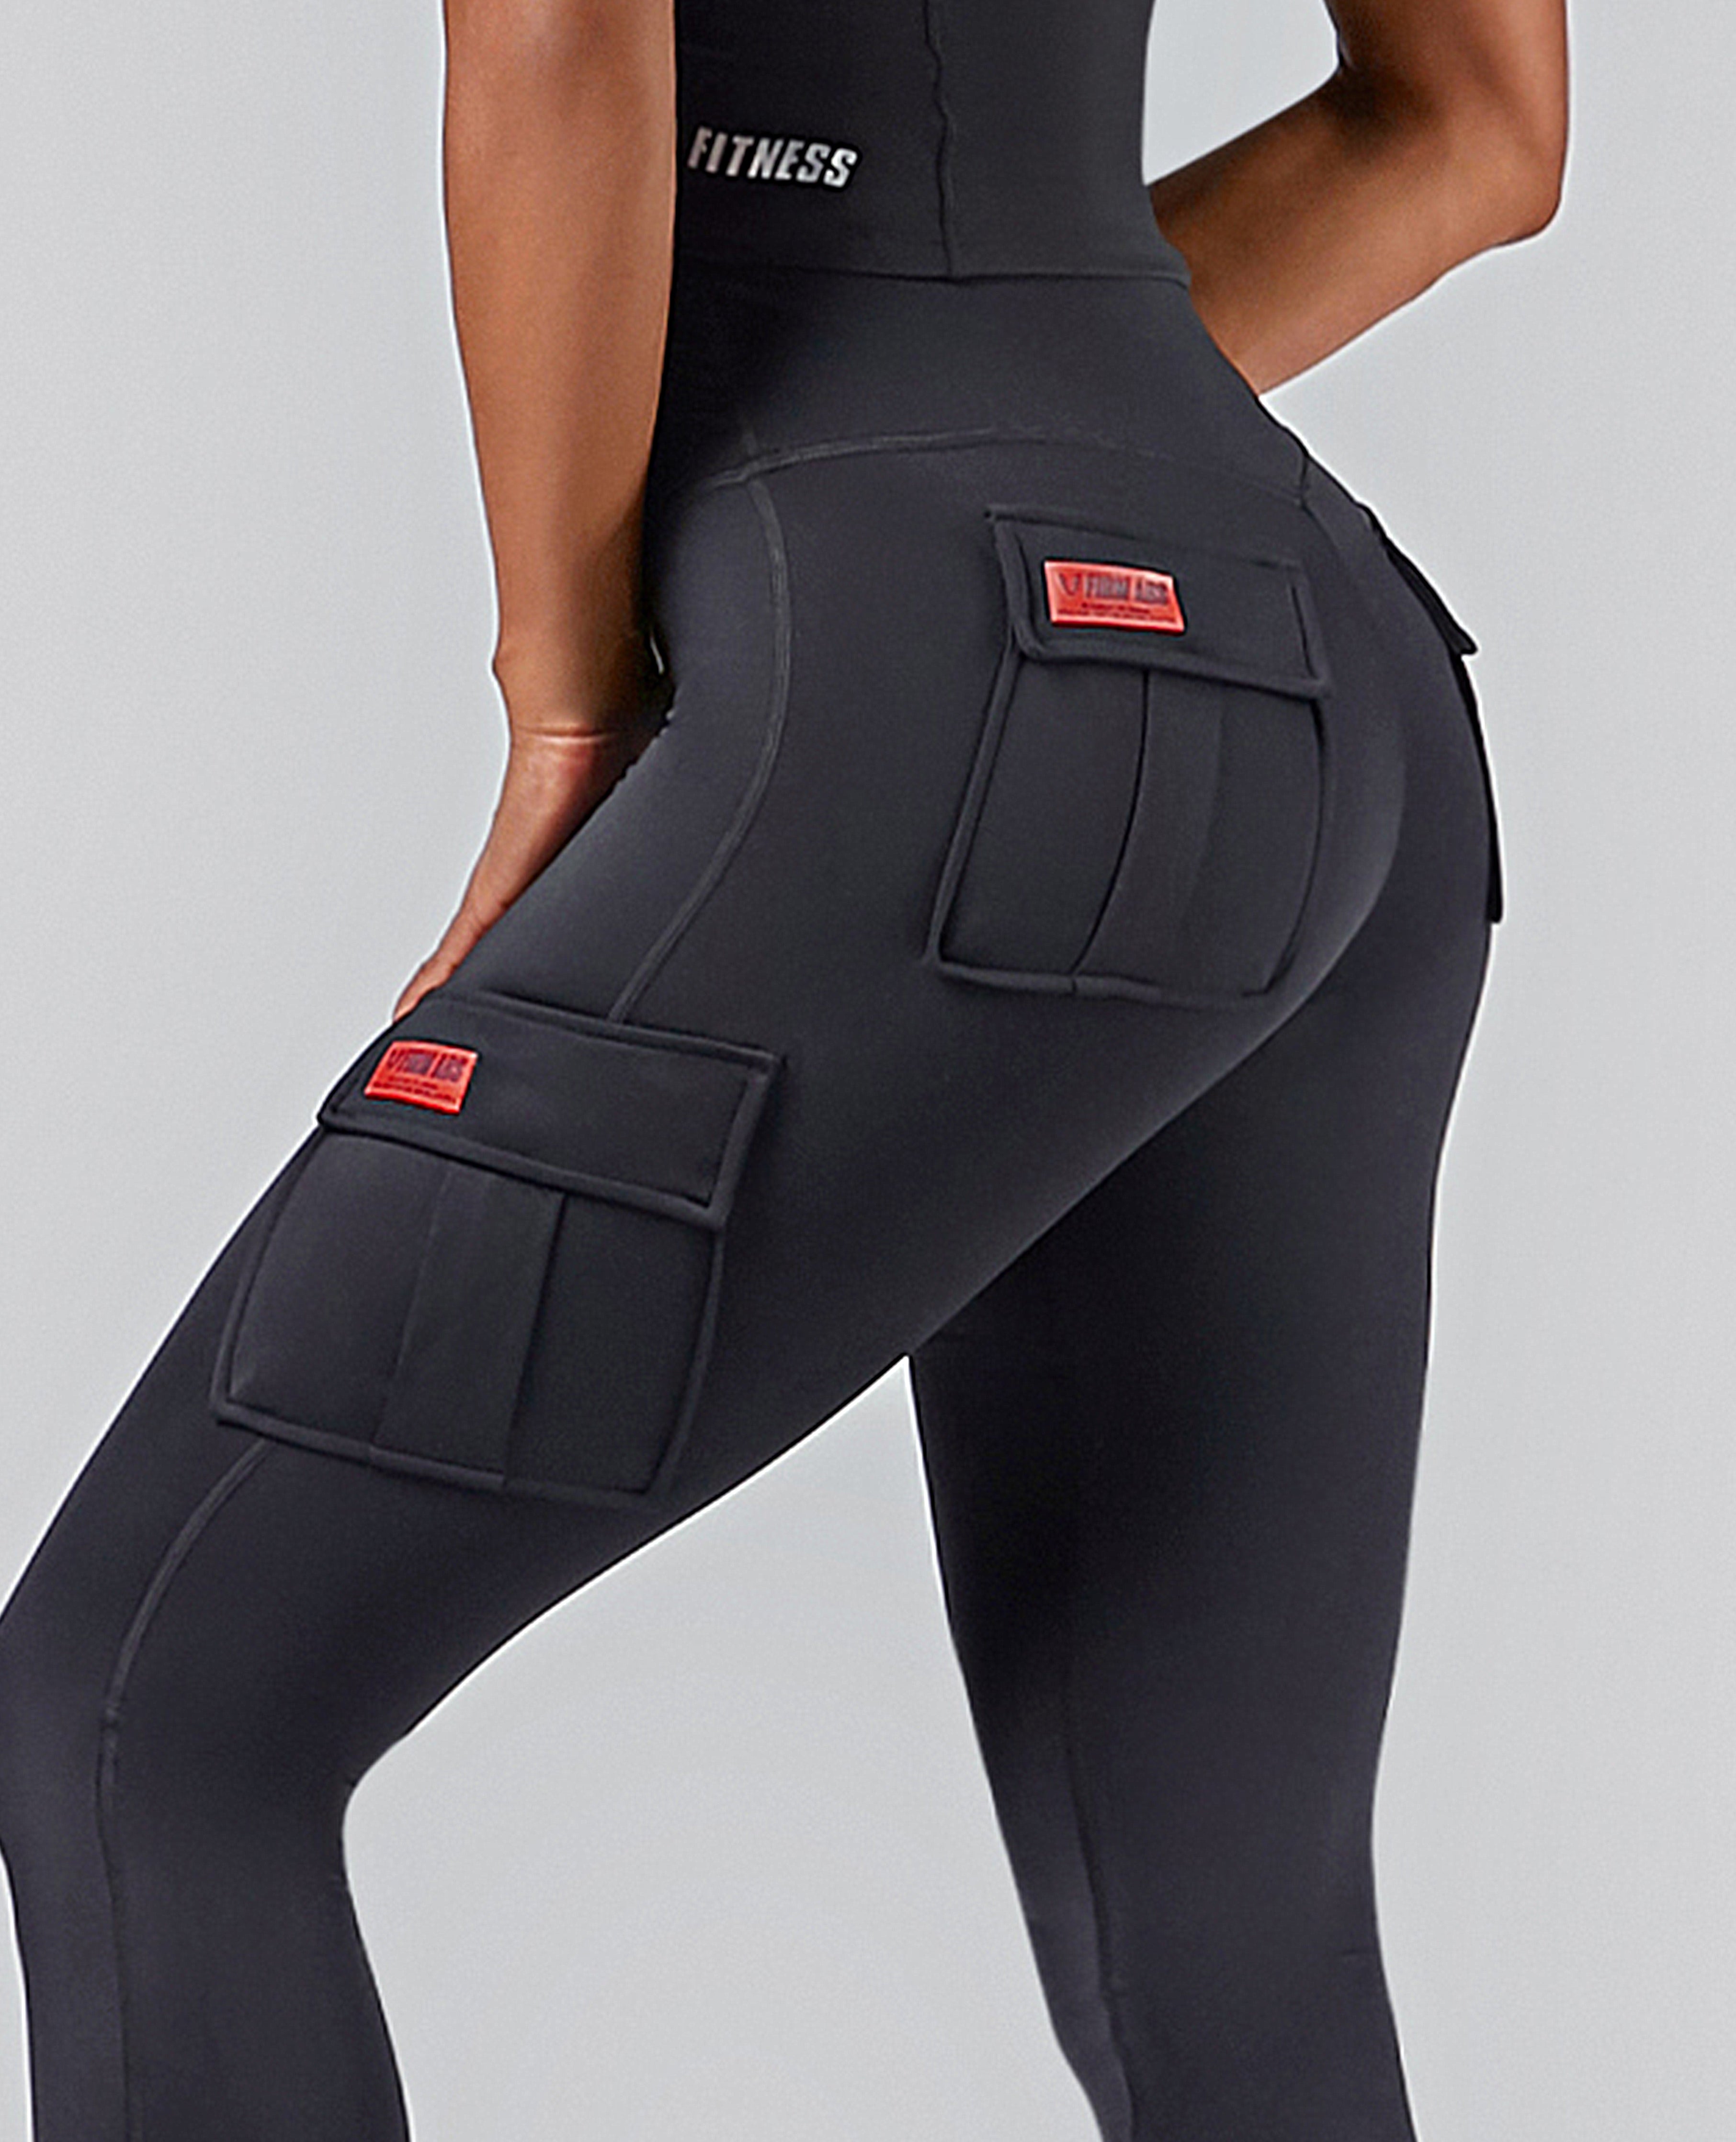 Buy GROTEEN 3 Pack High Waisted Leggings for Women Tummy Control - Workout  Running Hiking Everyday Black Leggings Yoga Pants at